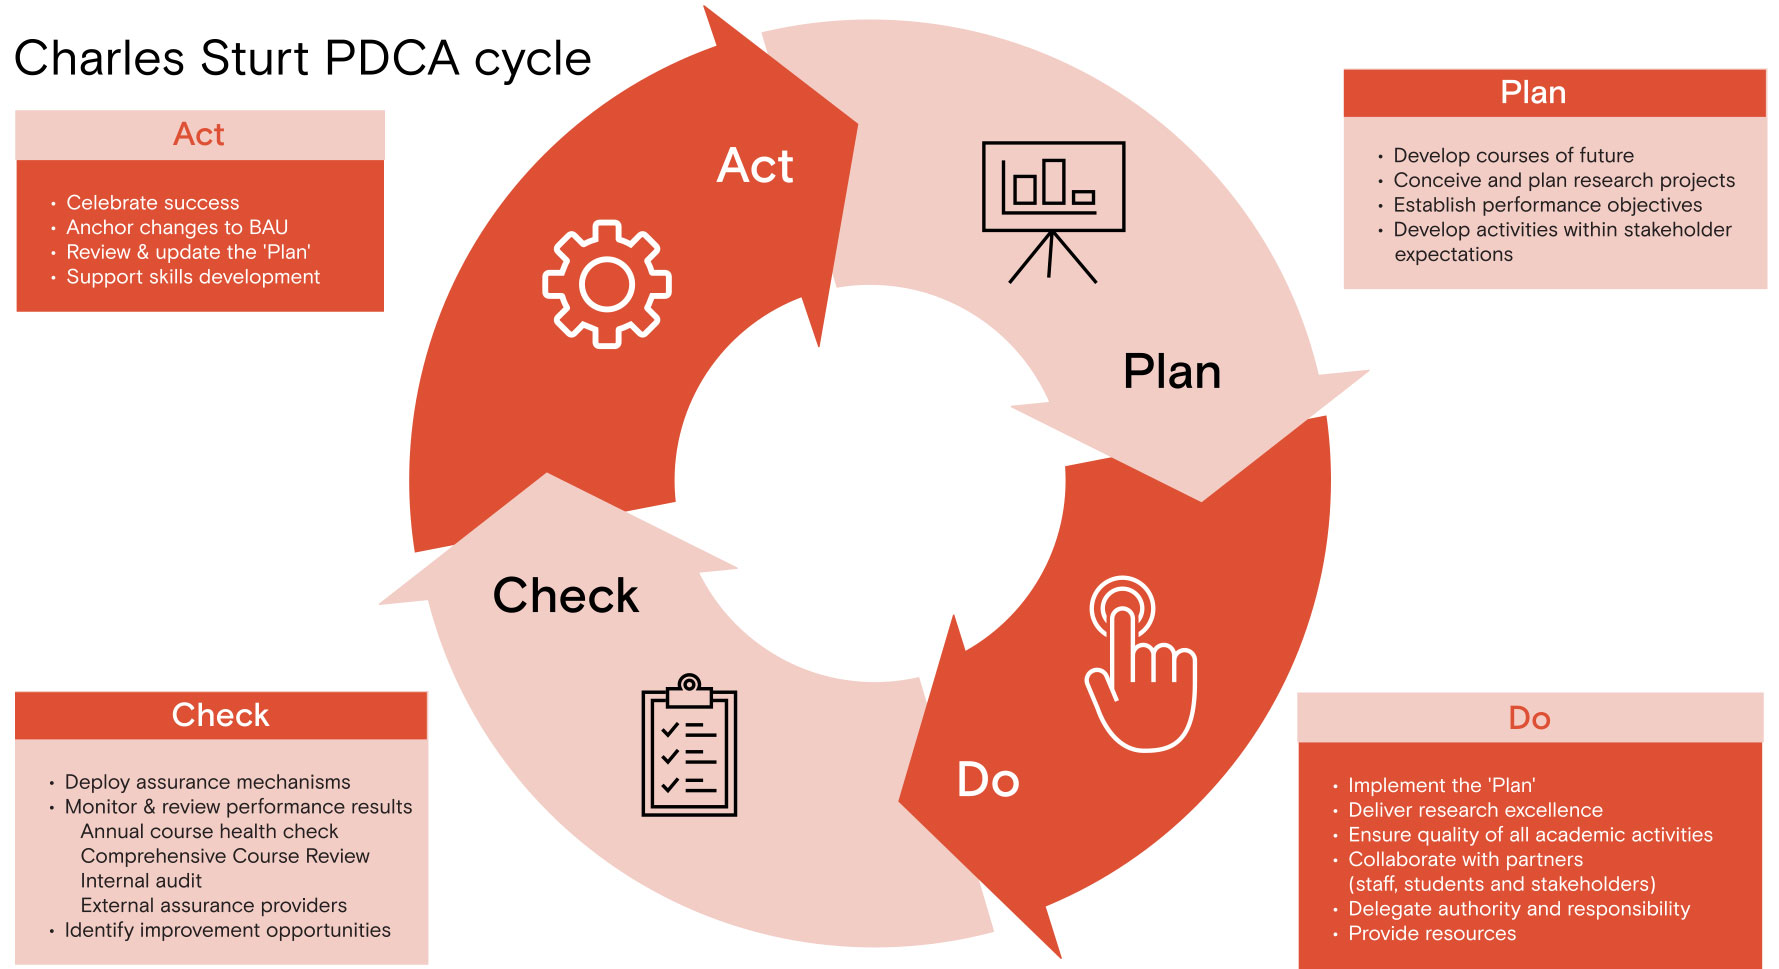 Charles Sturt Plan, Do, Check, Act (PDCA) cycle as described below.